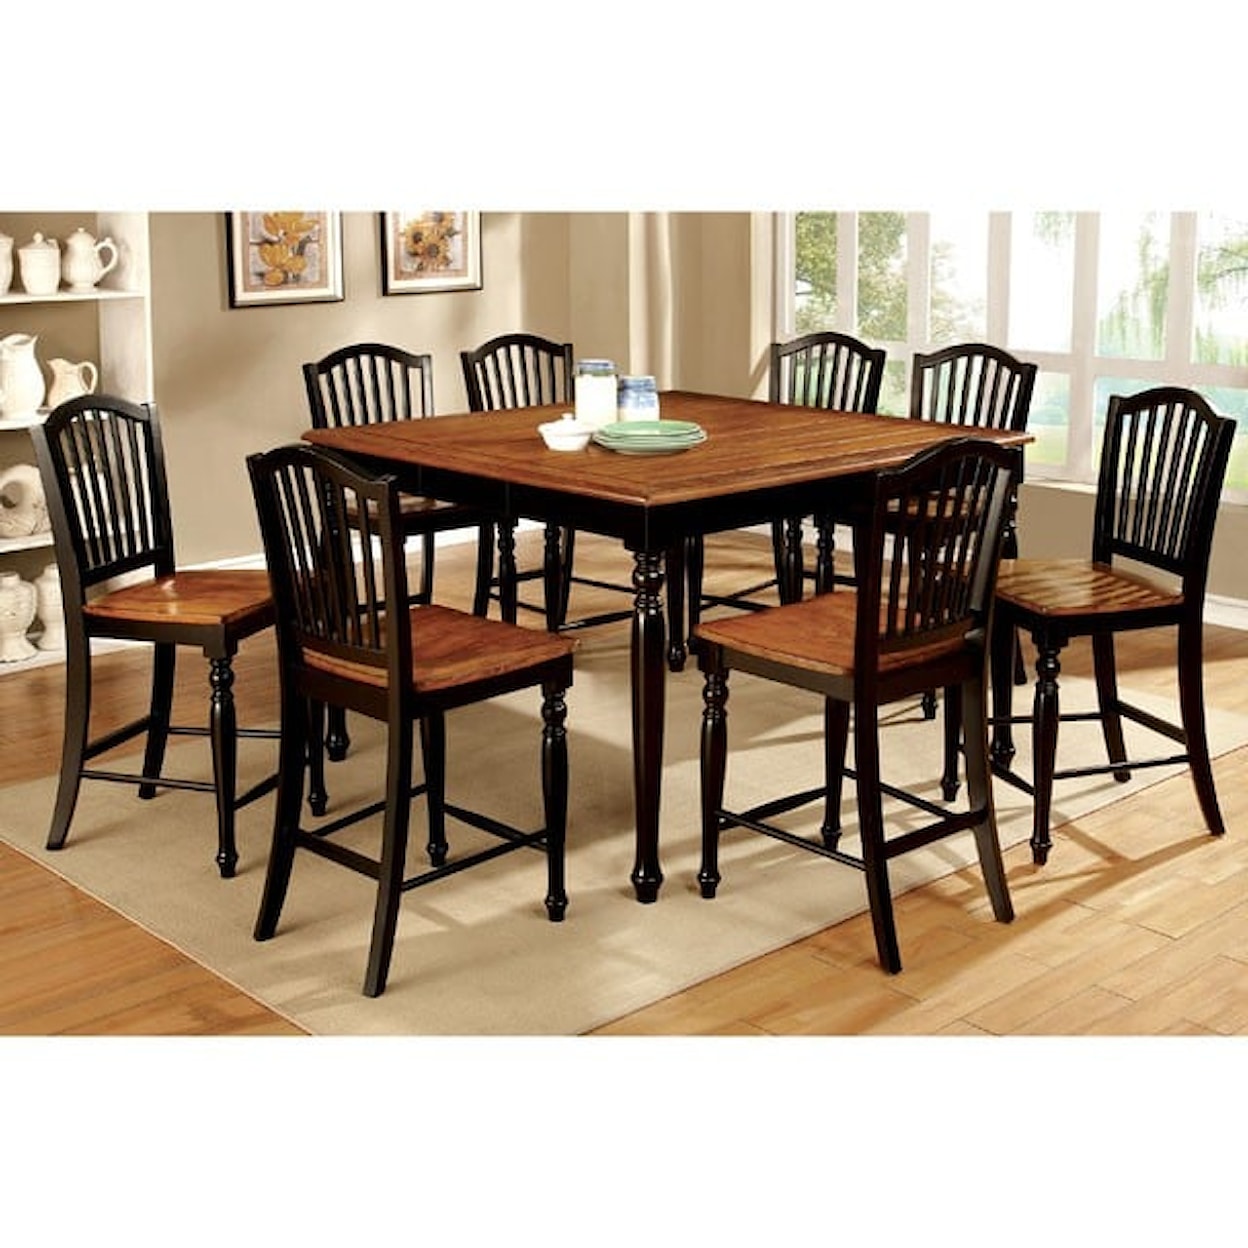 Furniture of America Mayville Counter Height Dining Table